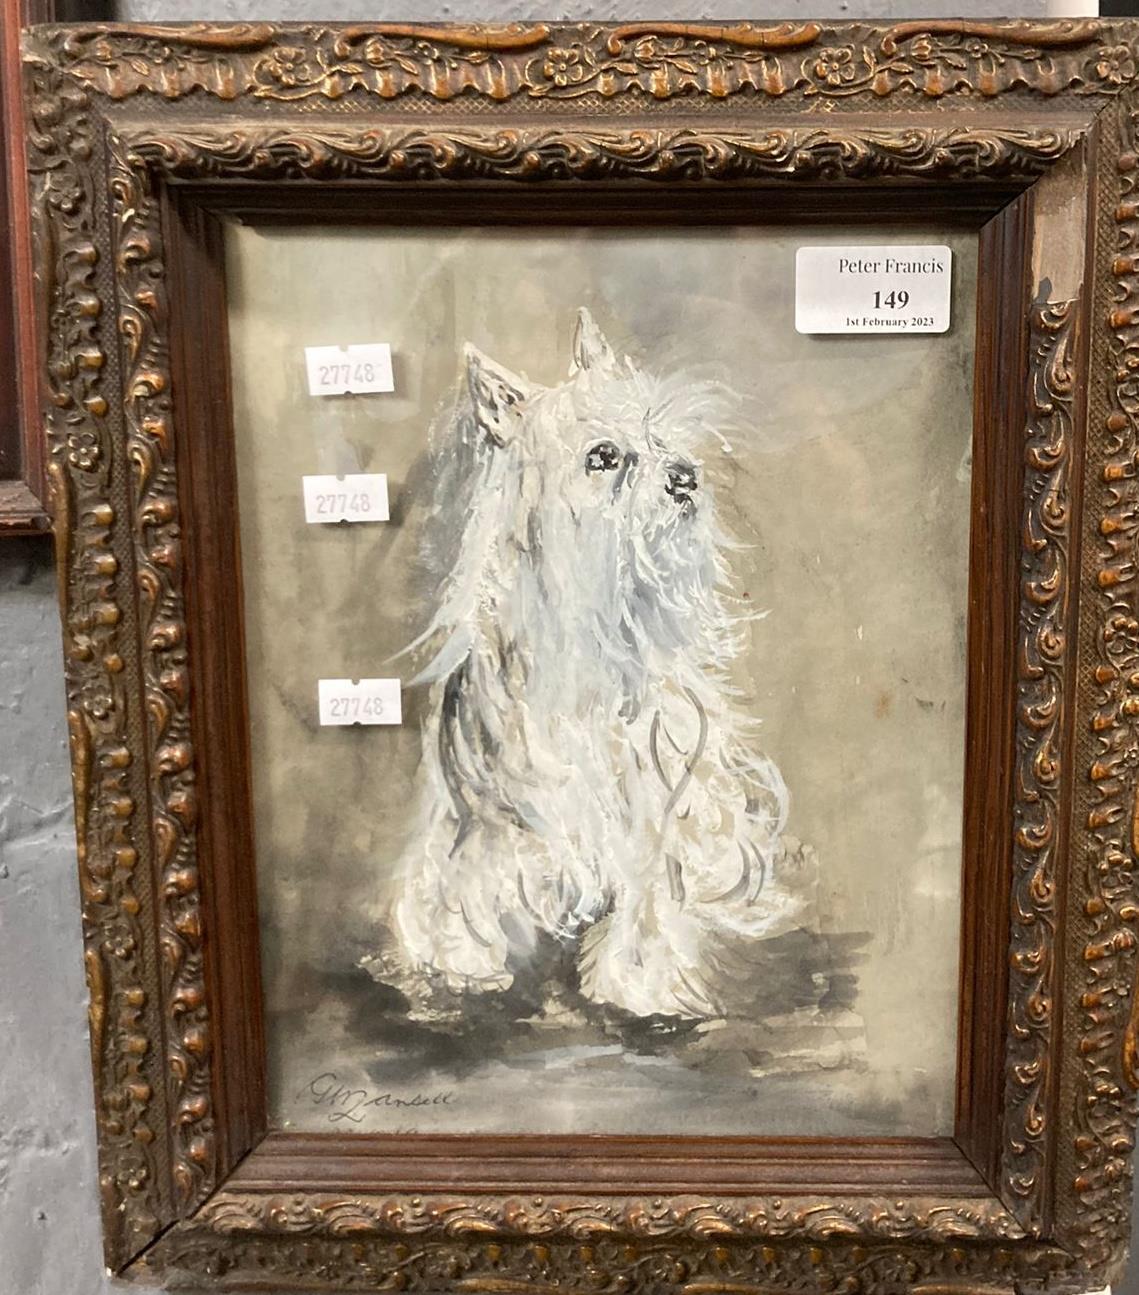 G Mansel, study of a white terrier, signed. Watercolours. 24x19cm approx. Framed. (B.P. 21% + VAT)